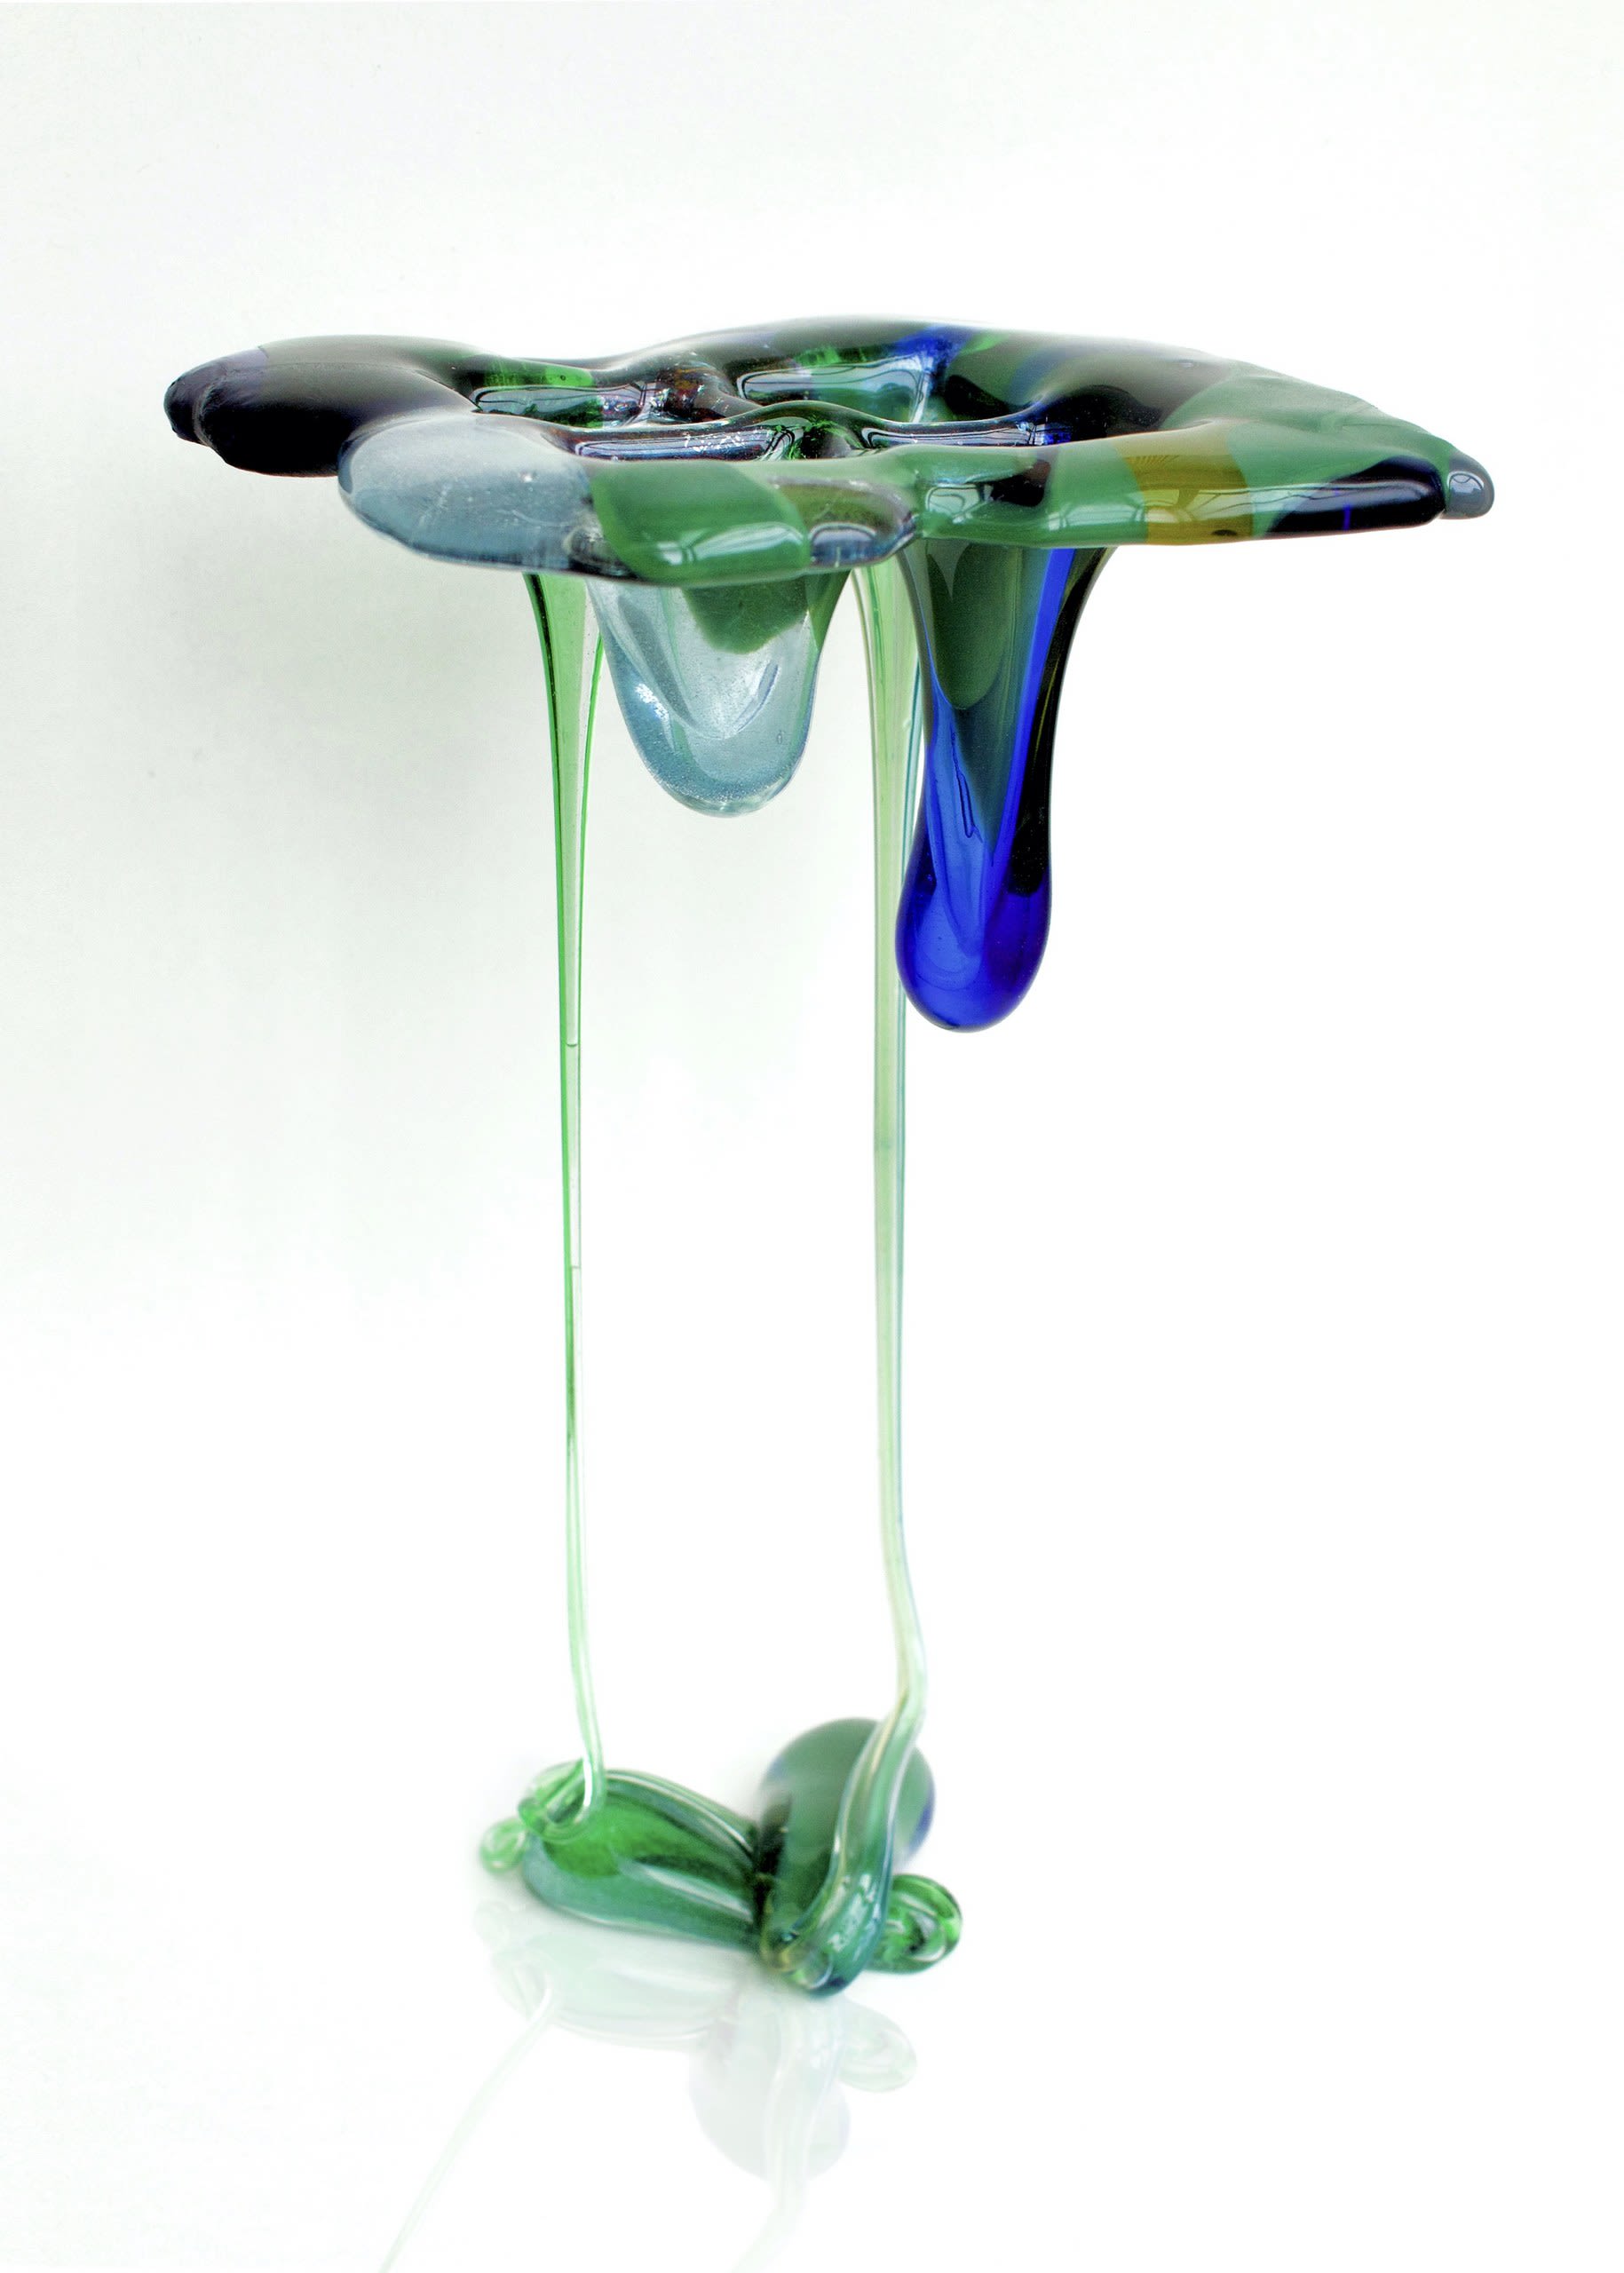 'Impending Collapse' — Kiln- formed glass and welded copper — 30 x 15 x 15 cm